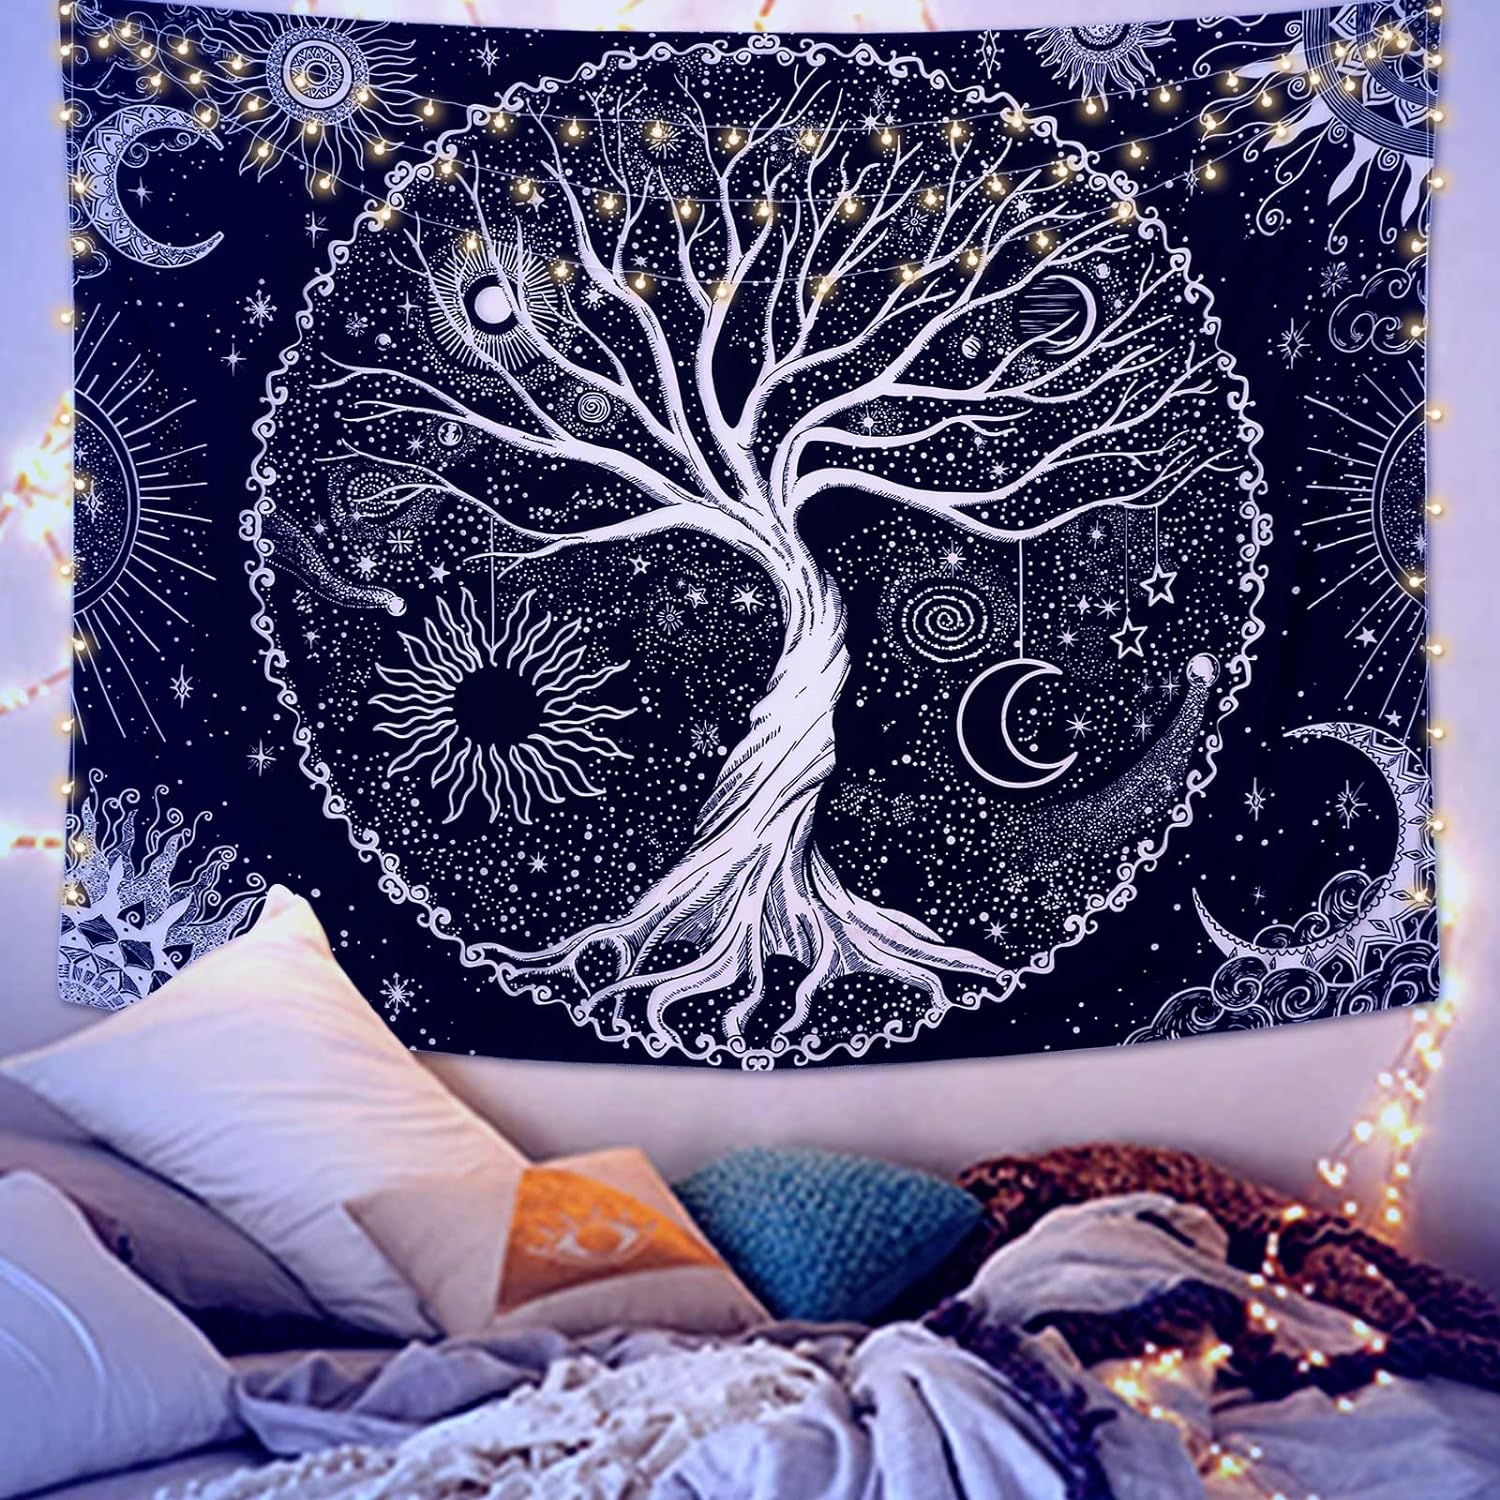 KHOYIME Tree of Life Tapestry Sun and Moon Tapesties Black Home Decor Psychedelic Eye Wall Hanging for Bedroom Dorm Decor (W59 x L51)